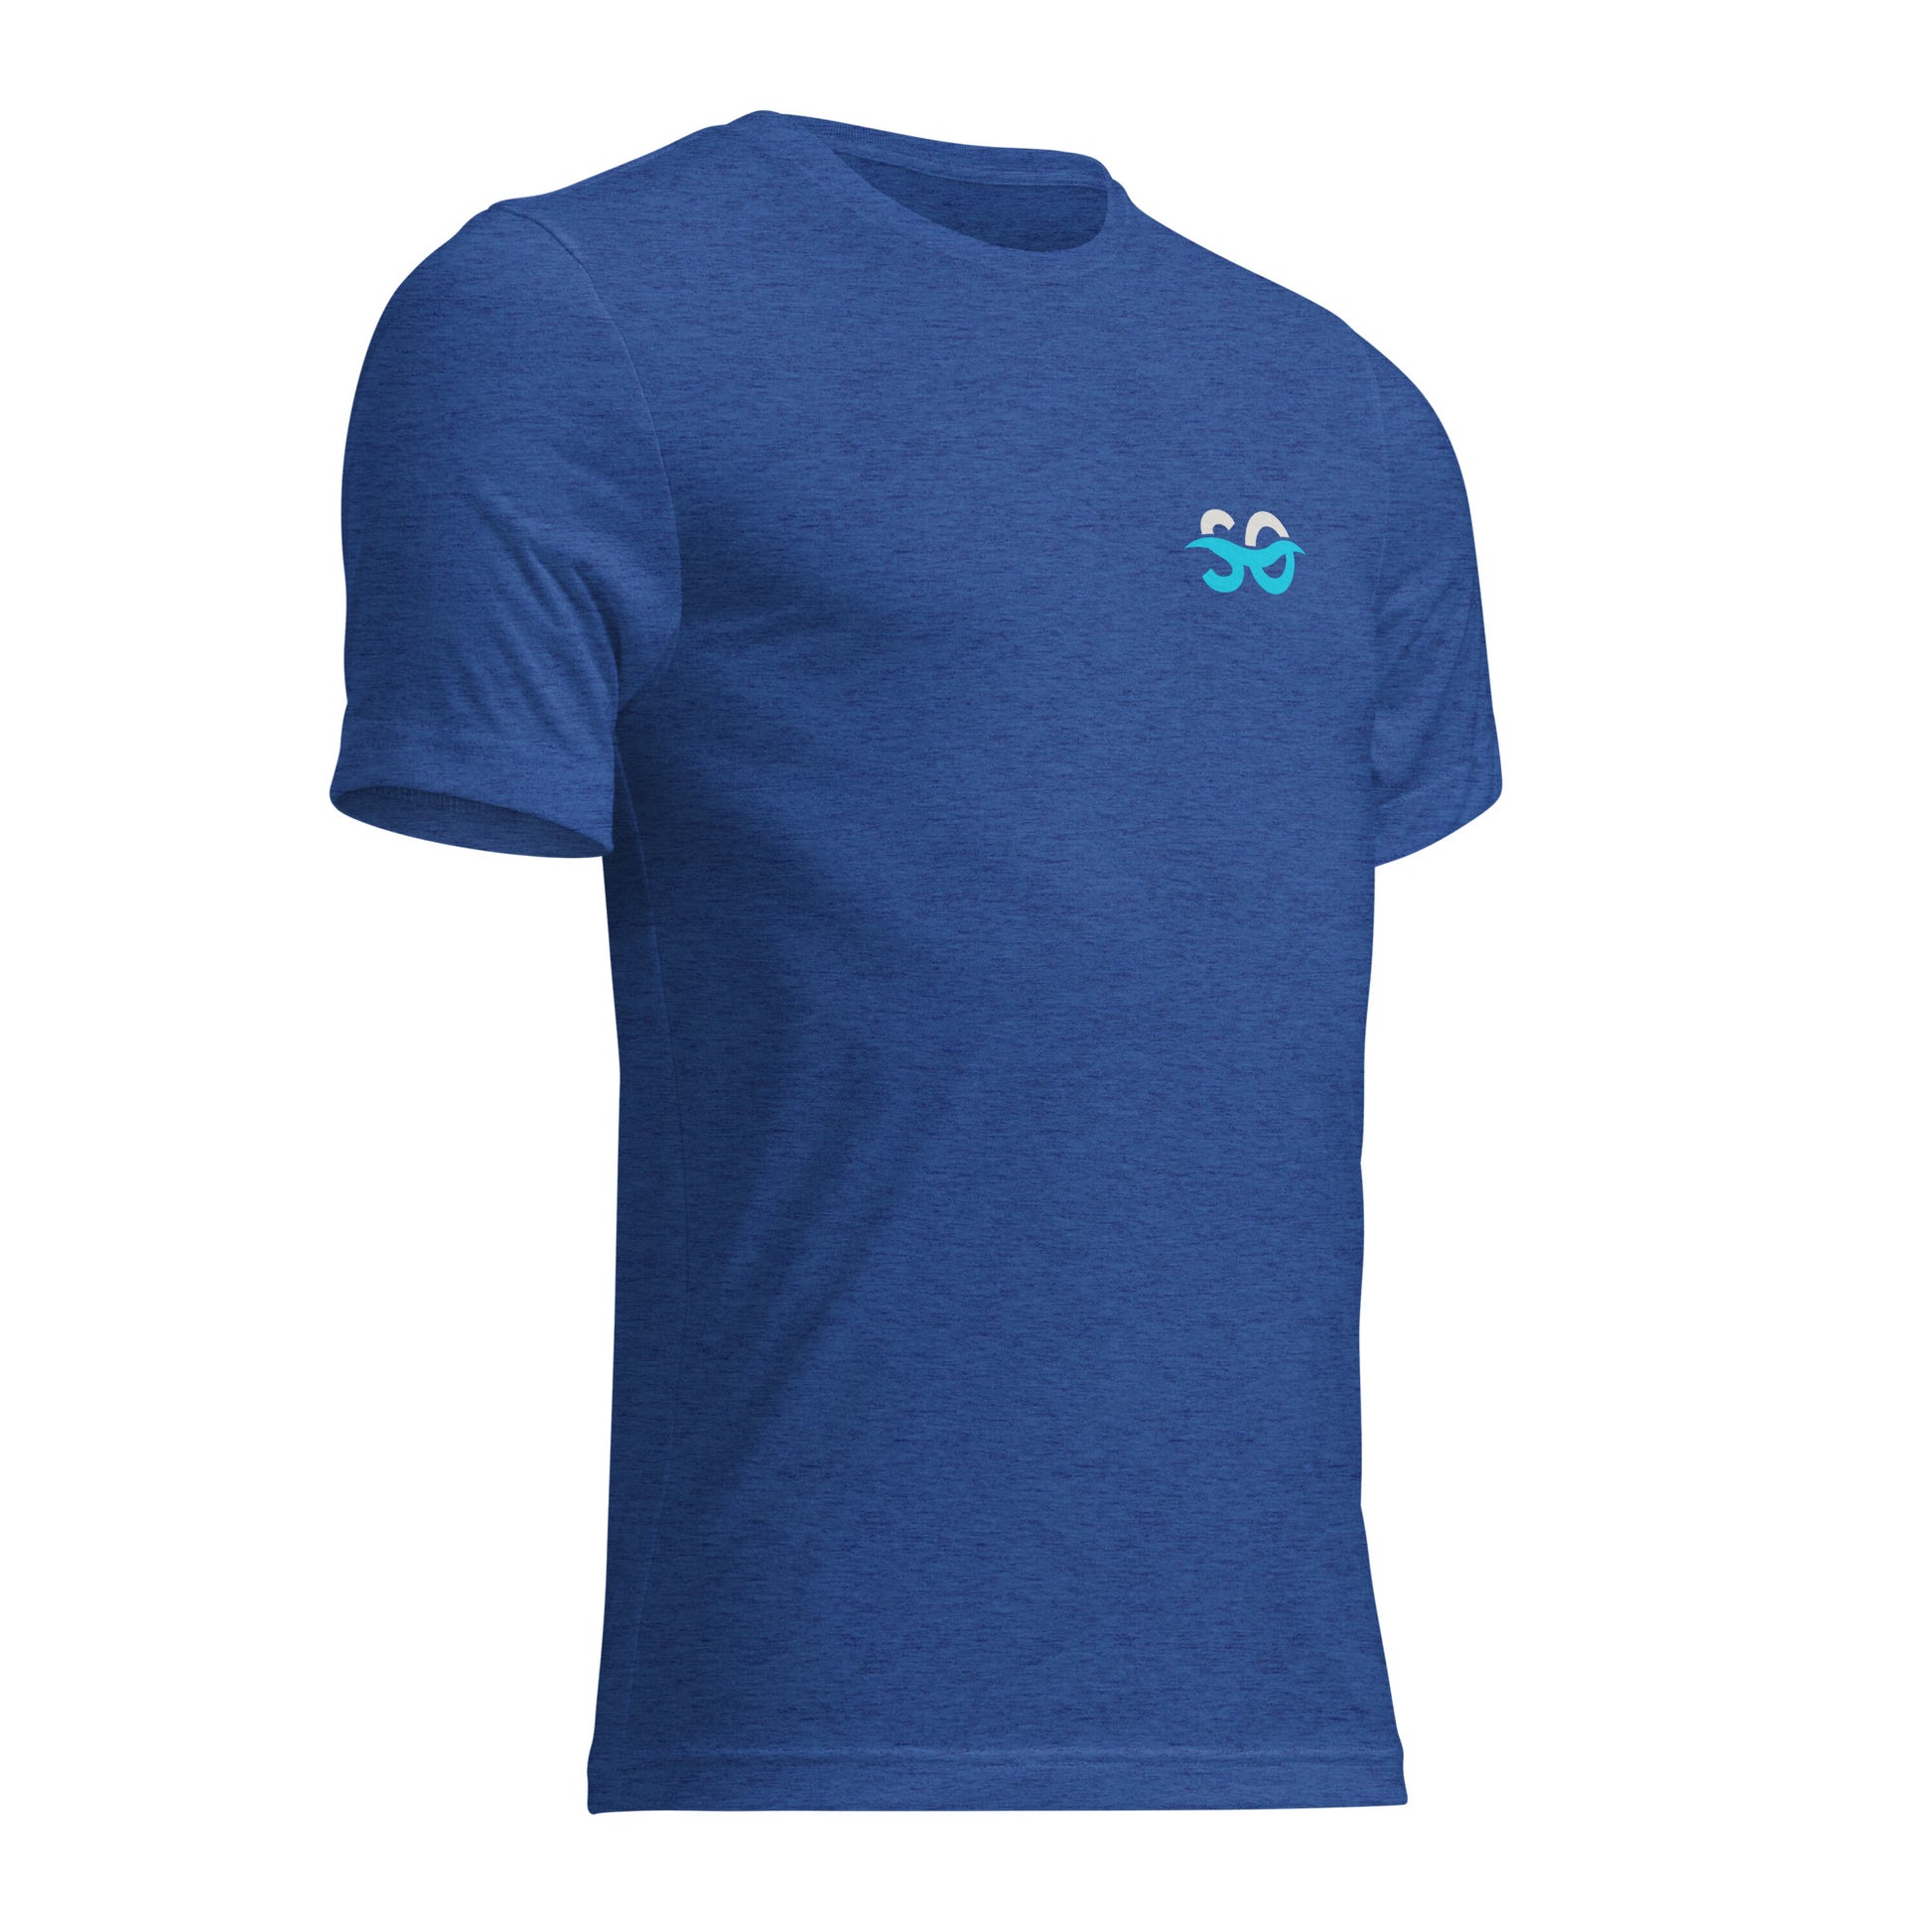 a blue t - shirt with the number 38 printed on it